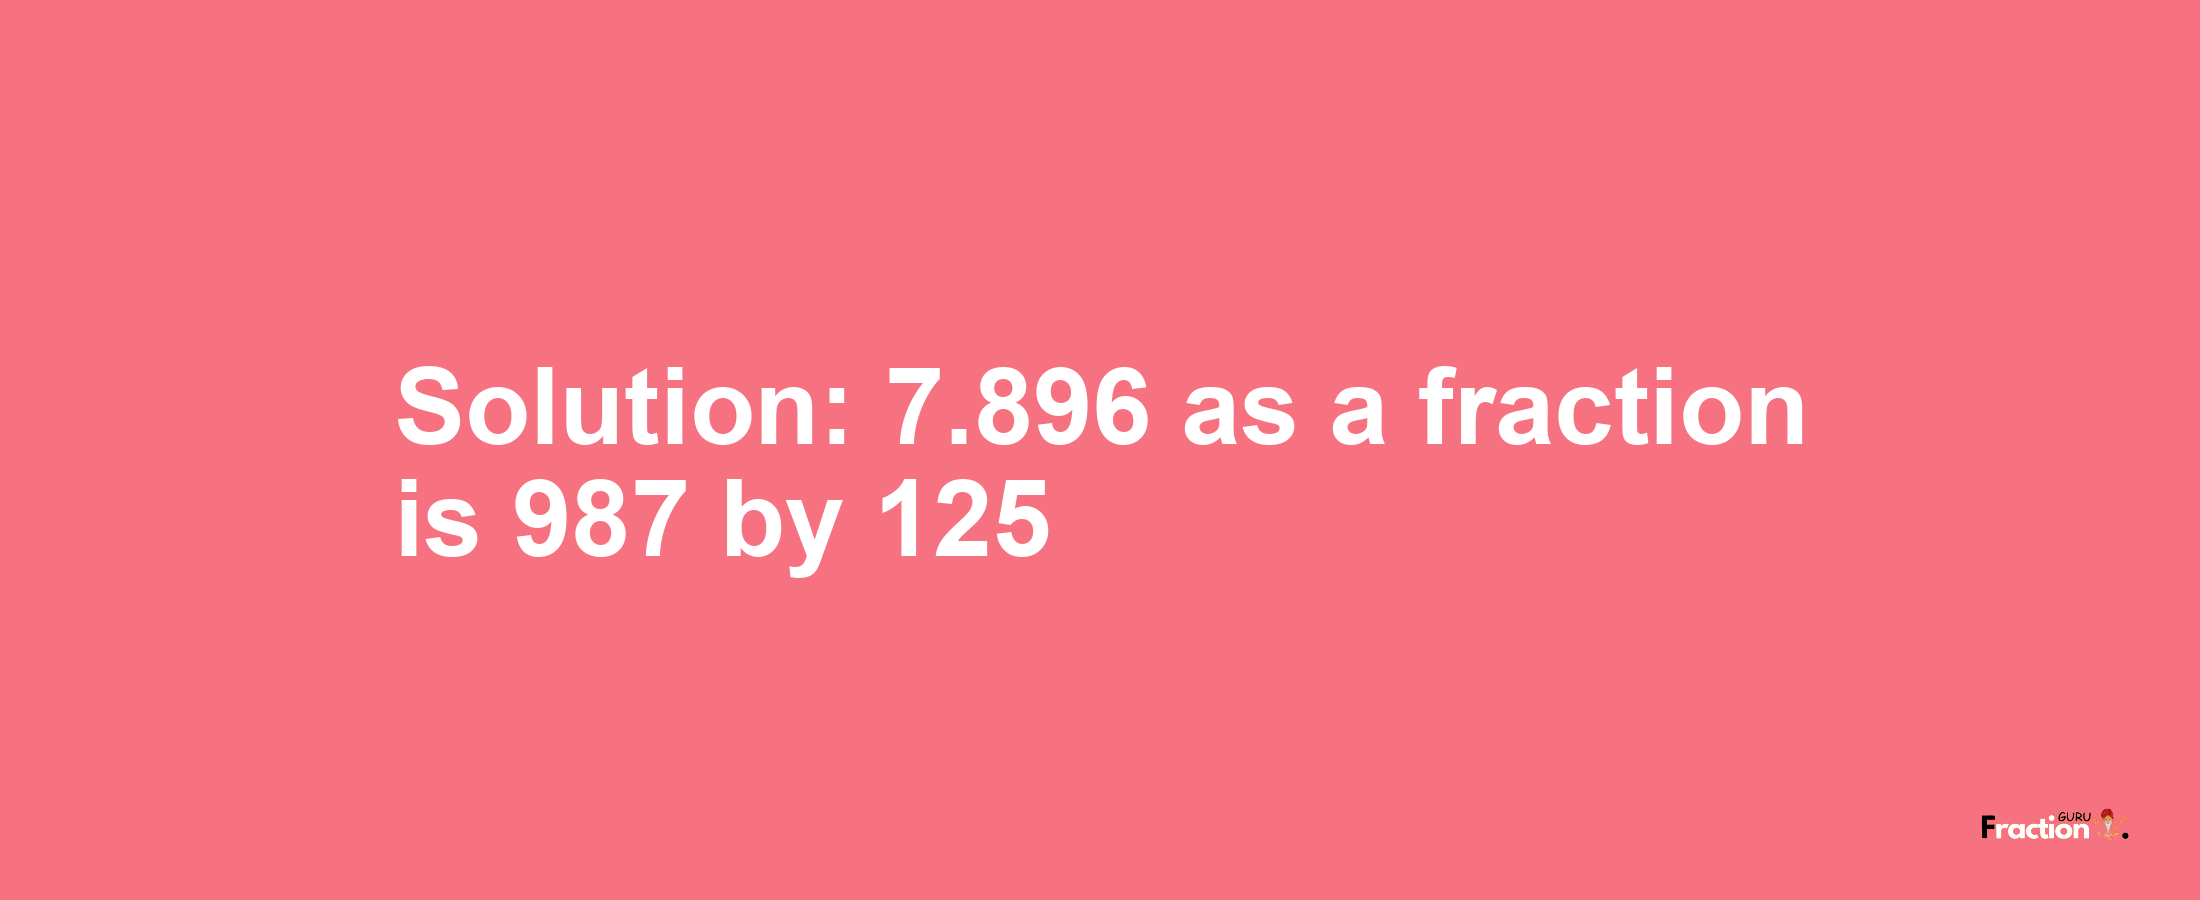 Solution:7.896 as a fraction is 987/125